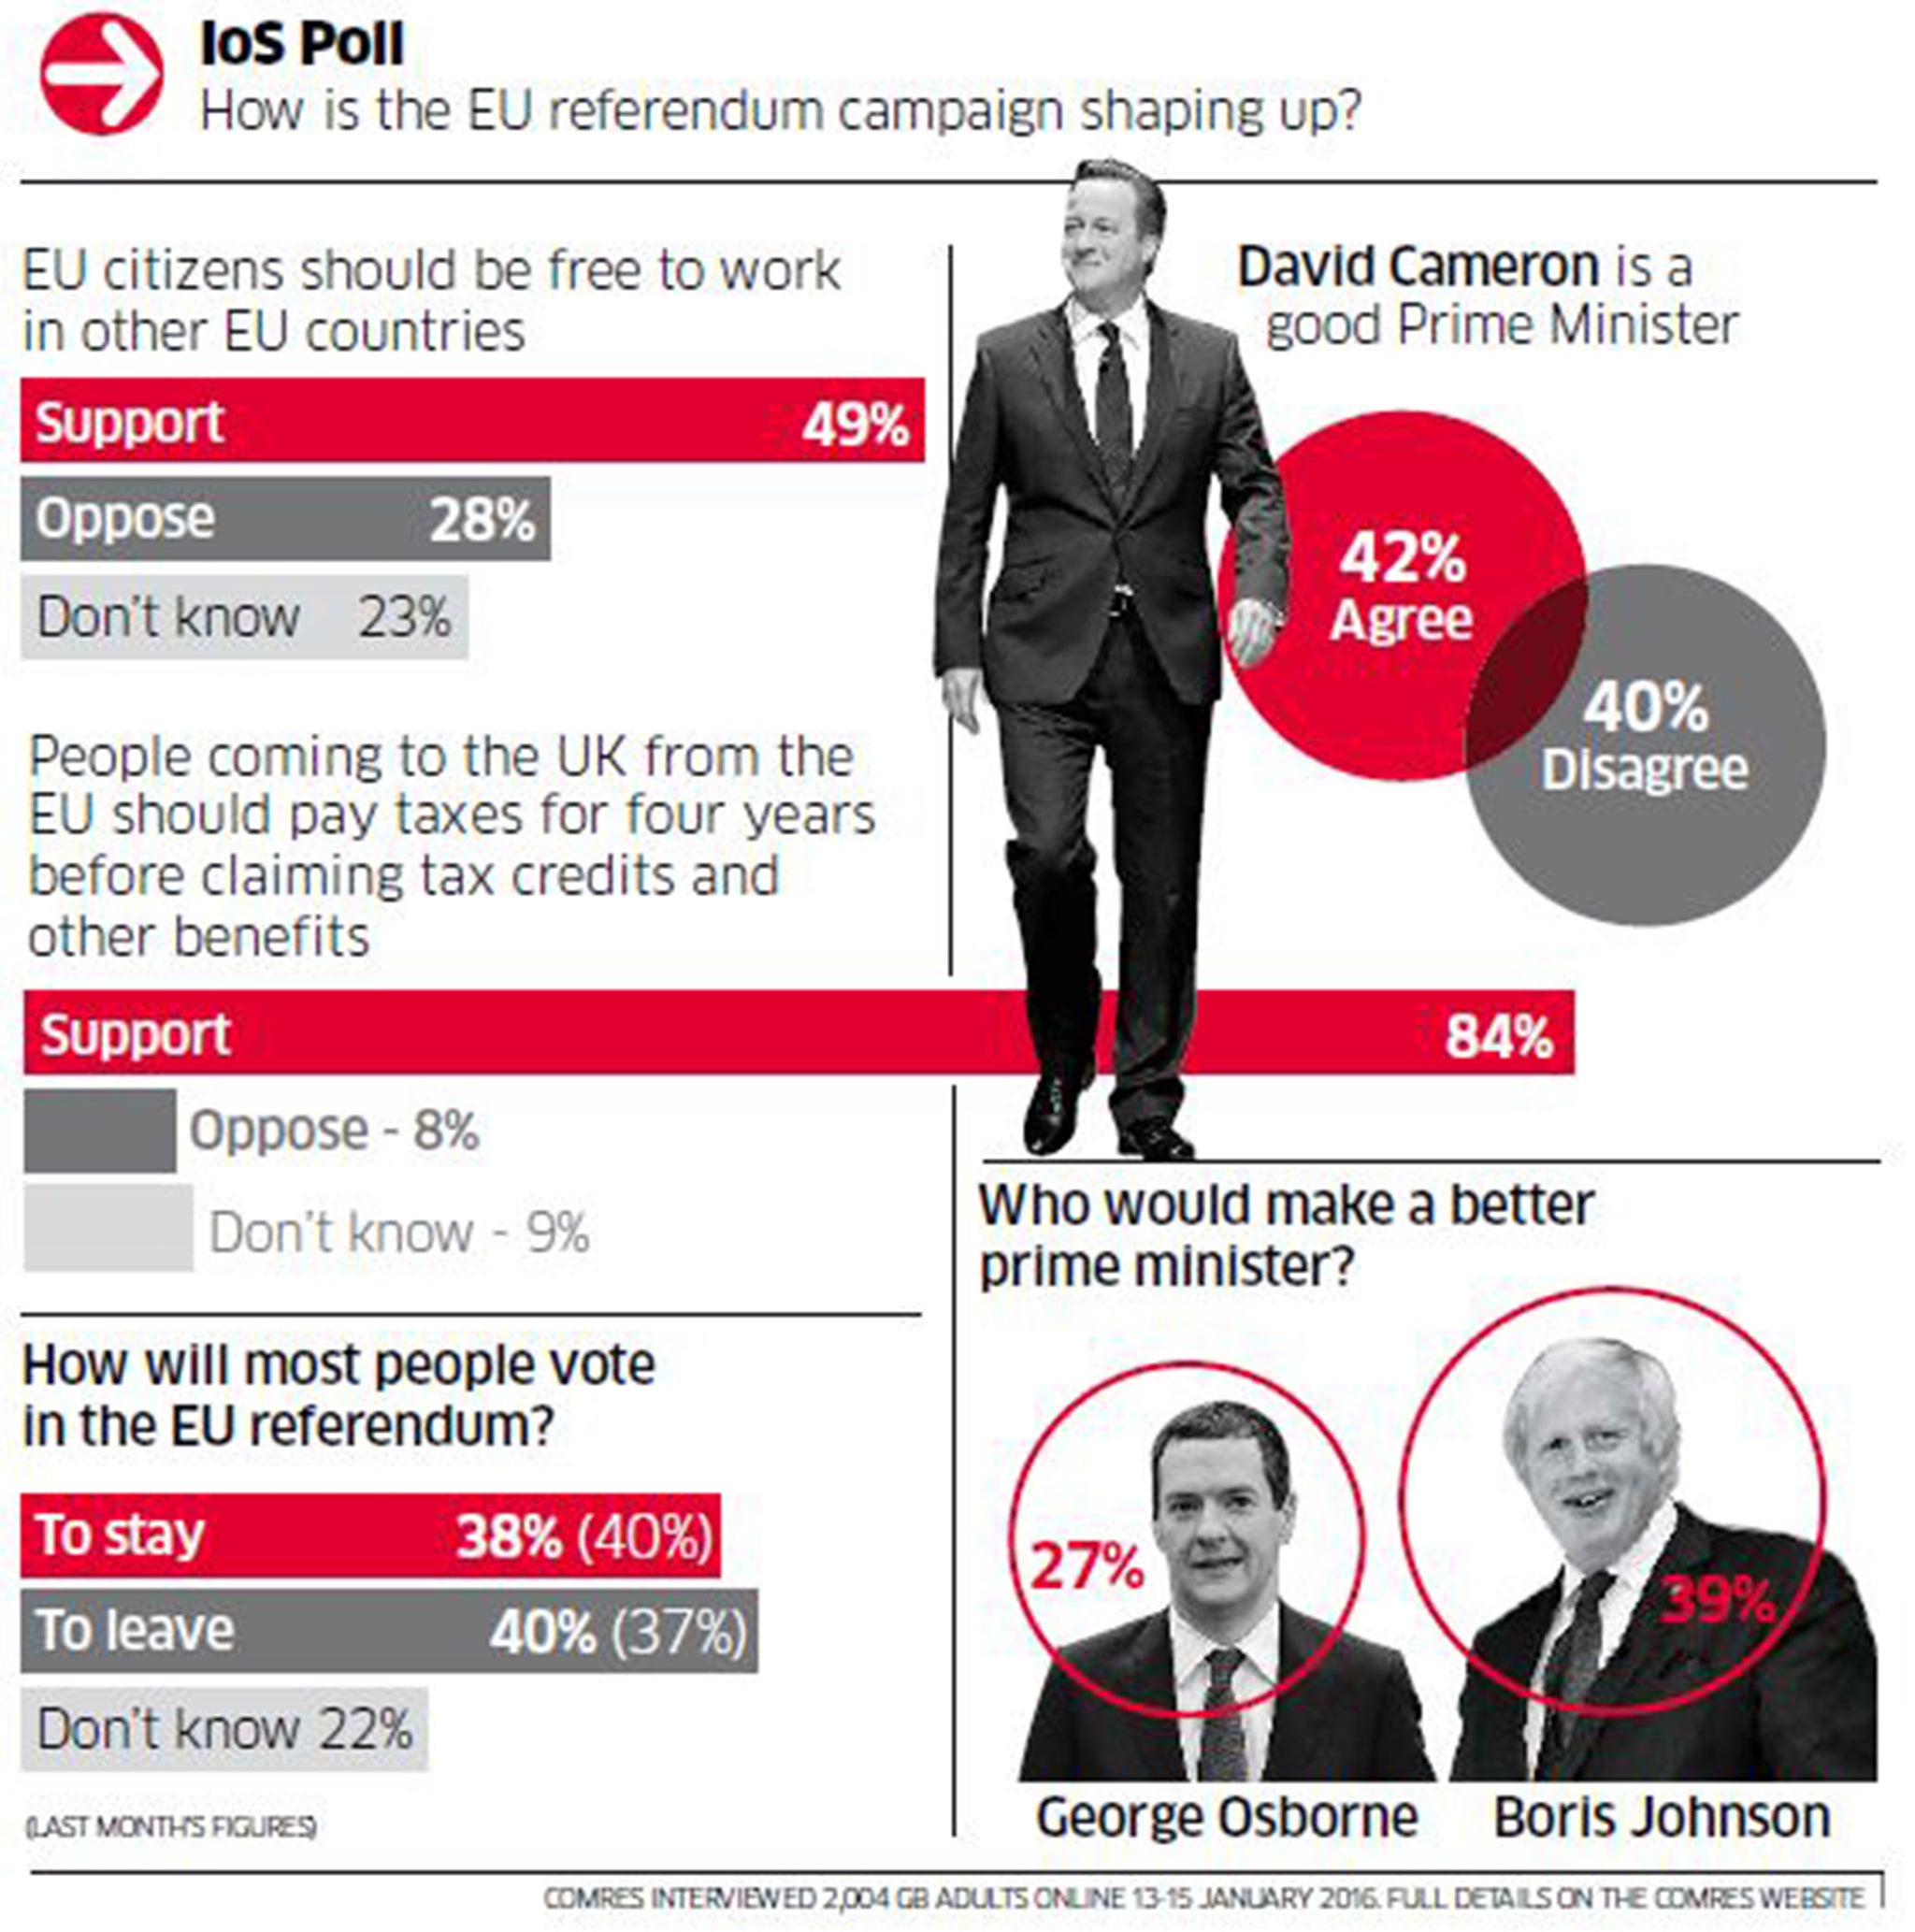 The ComRes poll for The IoS